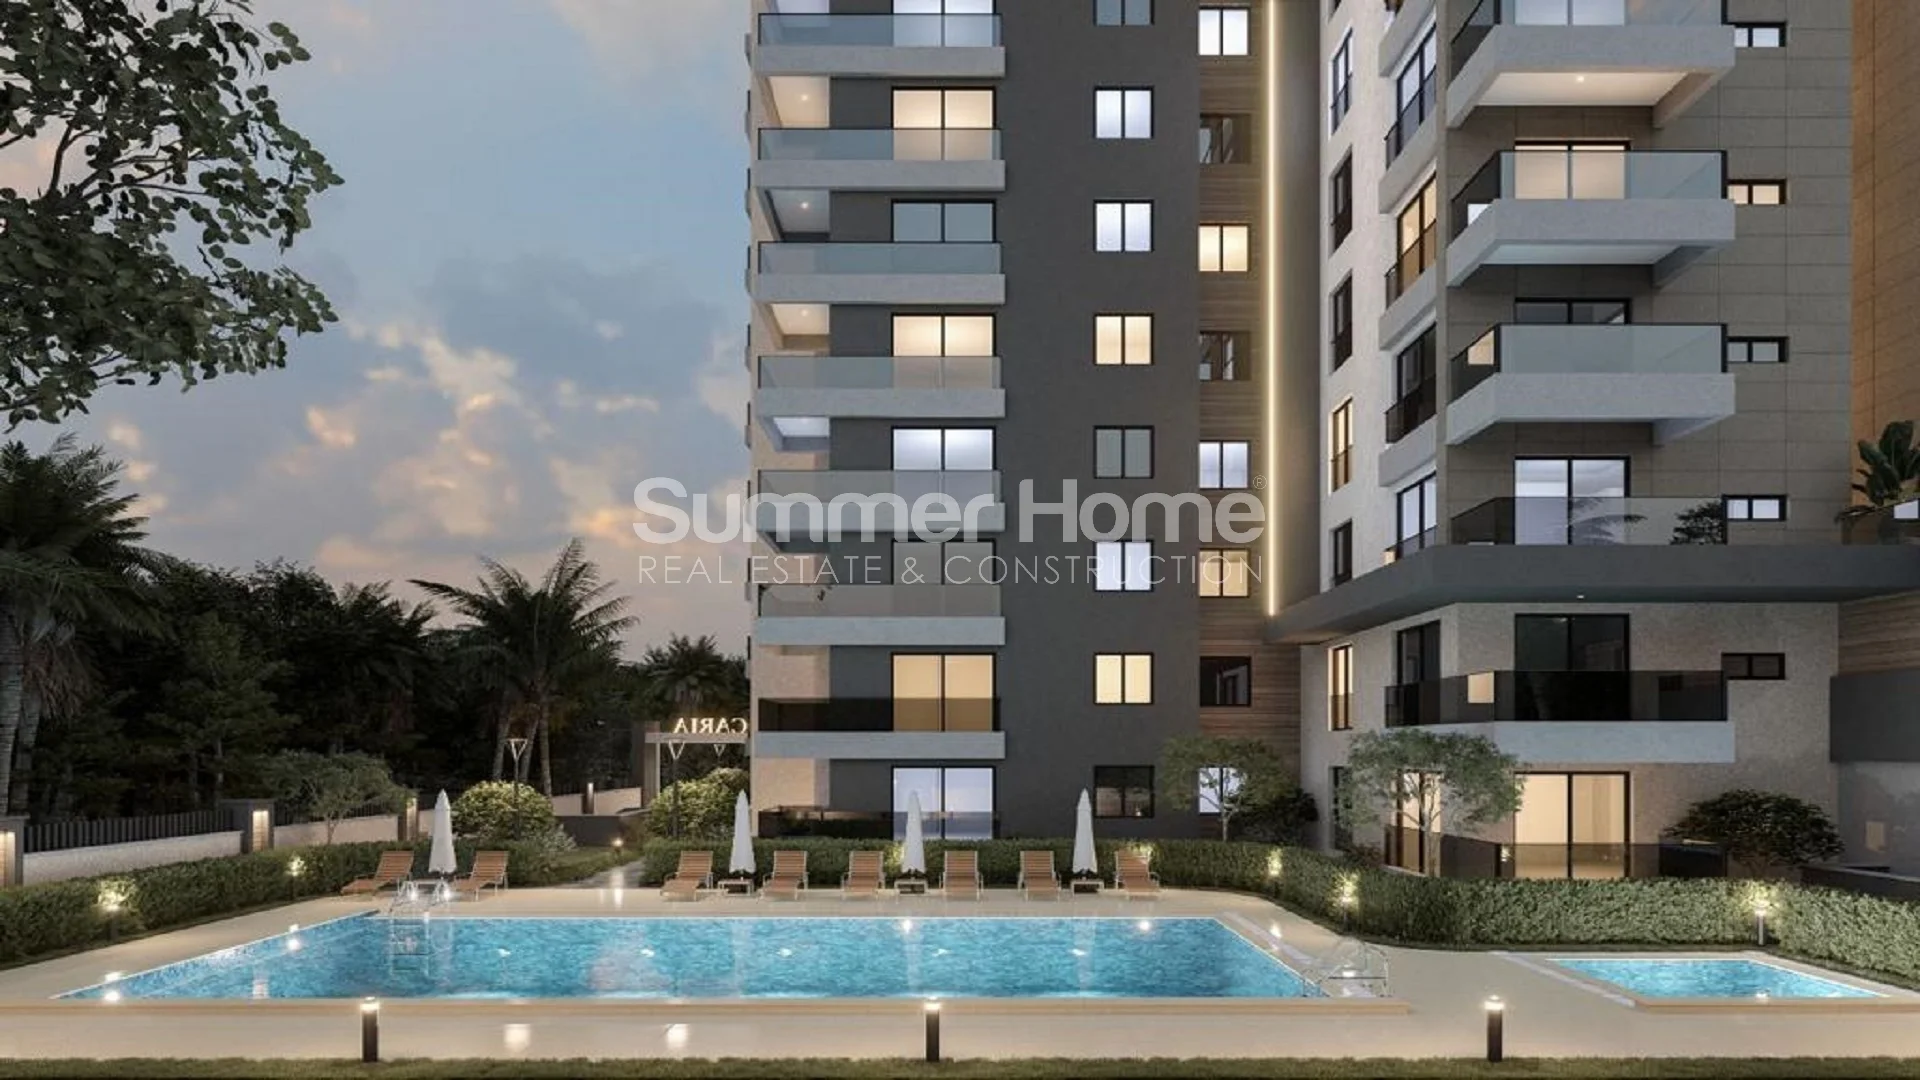 Modern, Chic Apartments For Sale Altintas general - 7